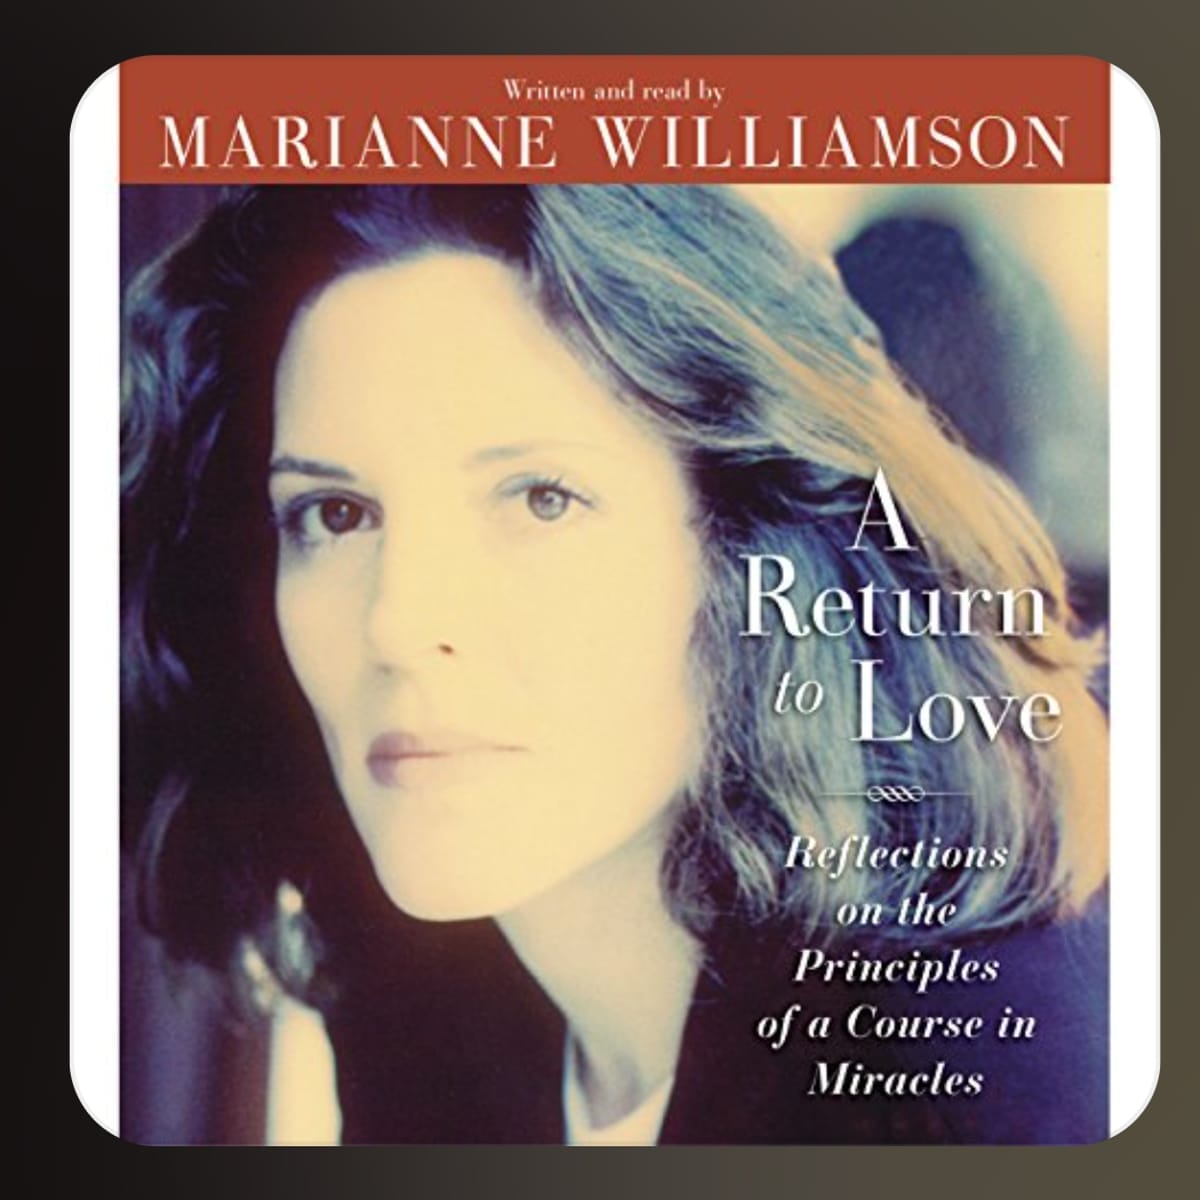 A Return to Love by Marianne Williamson